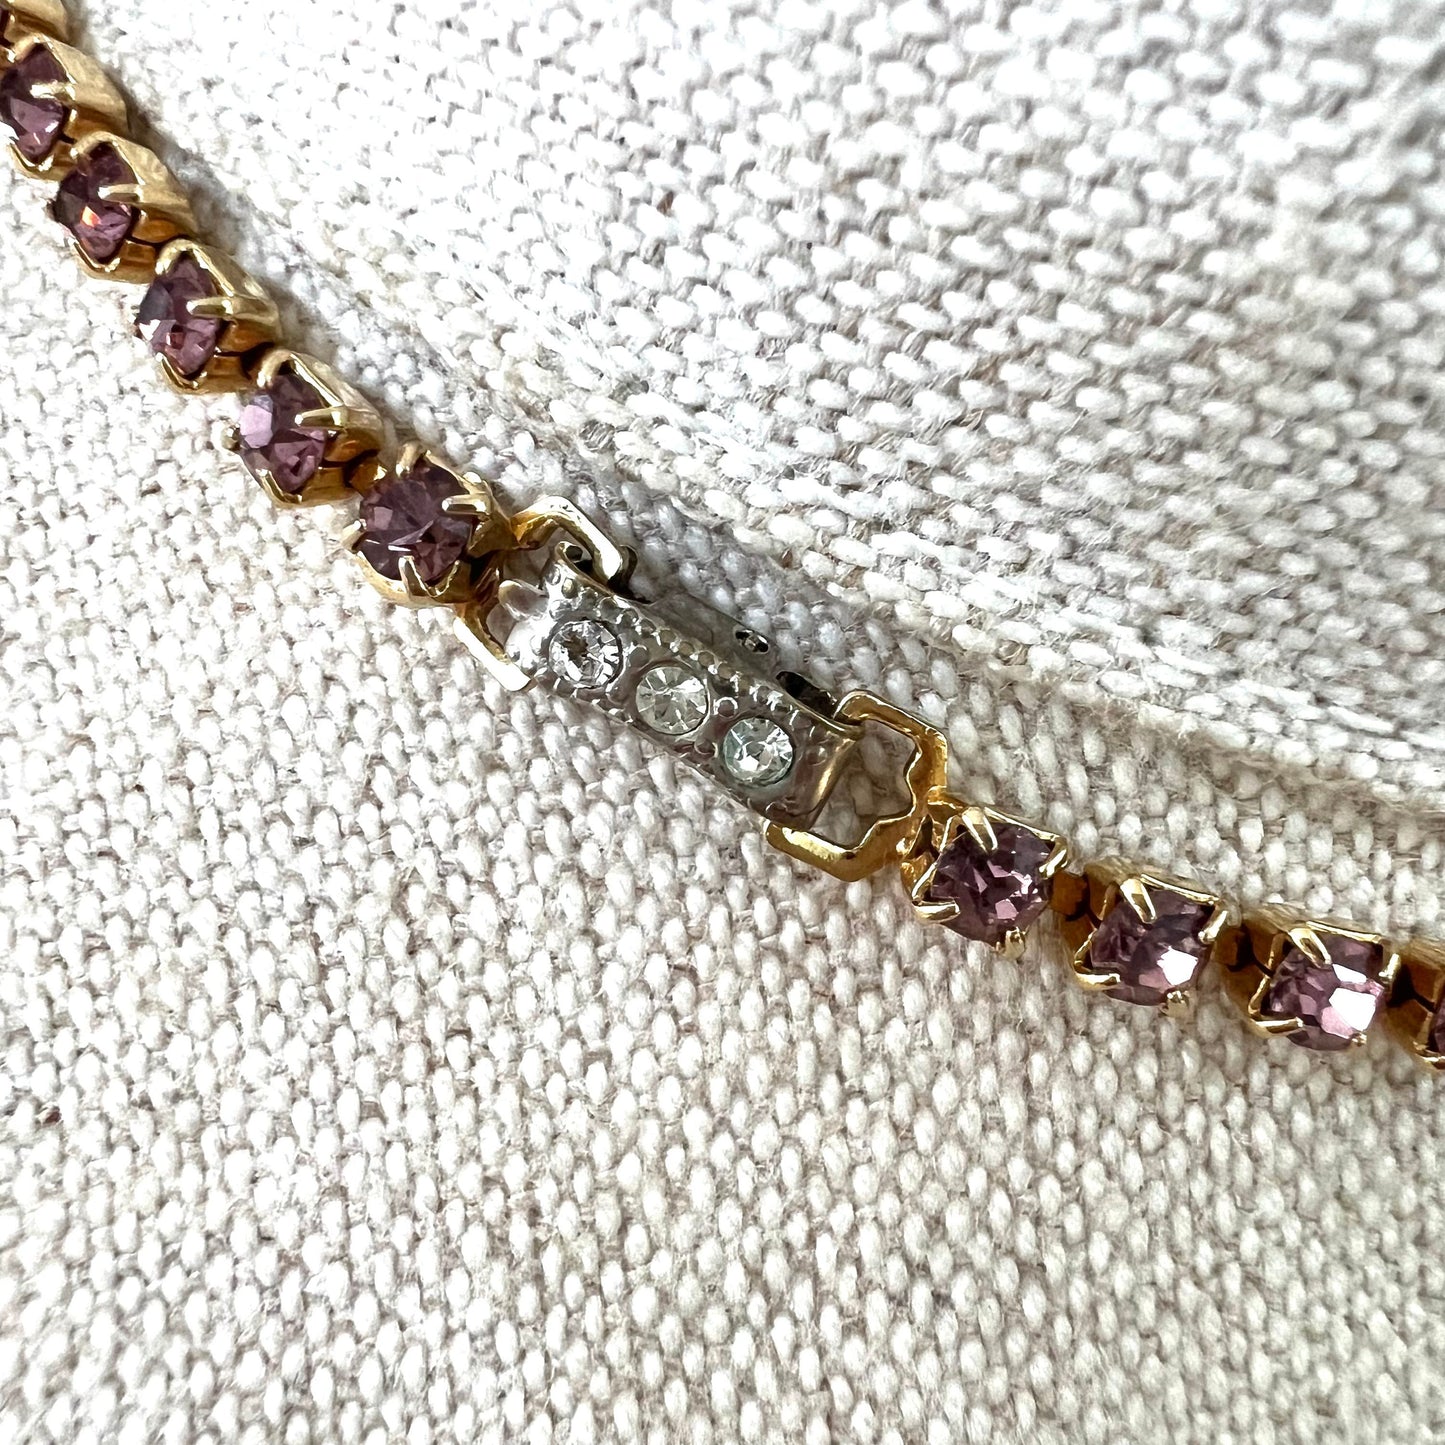 1950s Amethyst Glass Articulated Waterfall Necklace